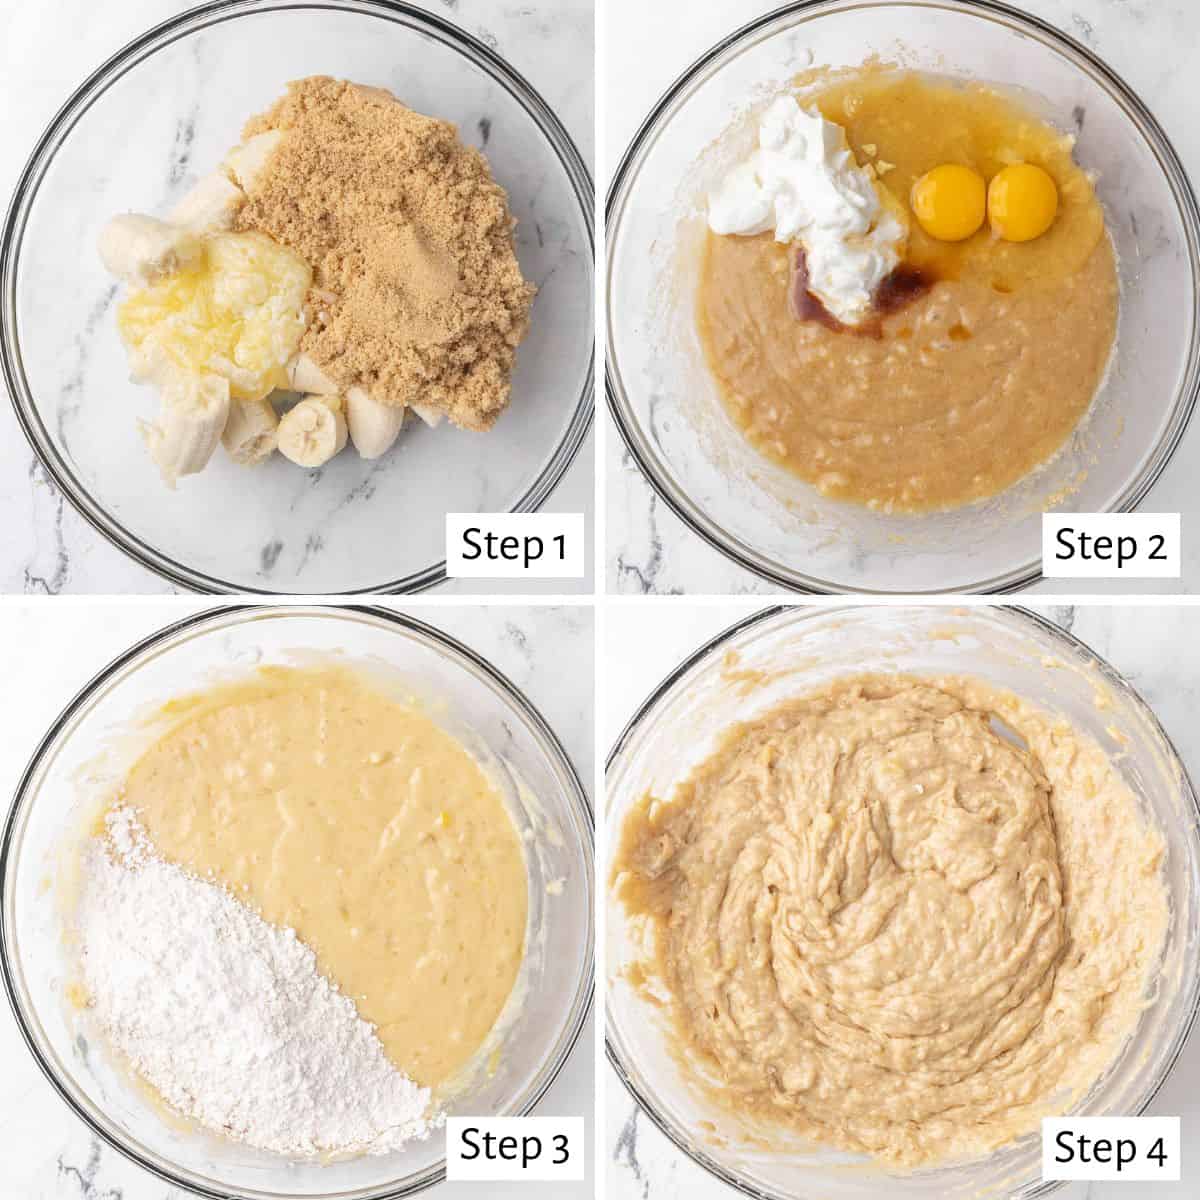 4-image collage of mixing the batter: 1 - Bananas, brown sugar, and melted butter in a bowl before mashing; 2 - After mashing with yogurt, eggs, and vanilla added before combining; 3 - After combined with dry ingredient added before folding together; 4 - The final batter.